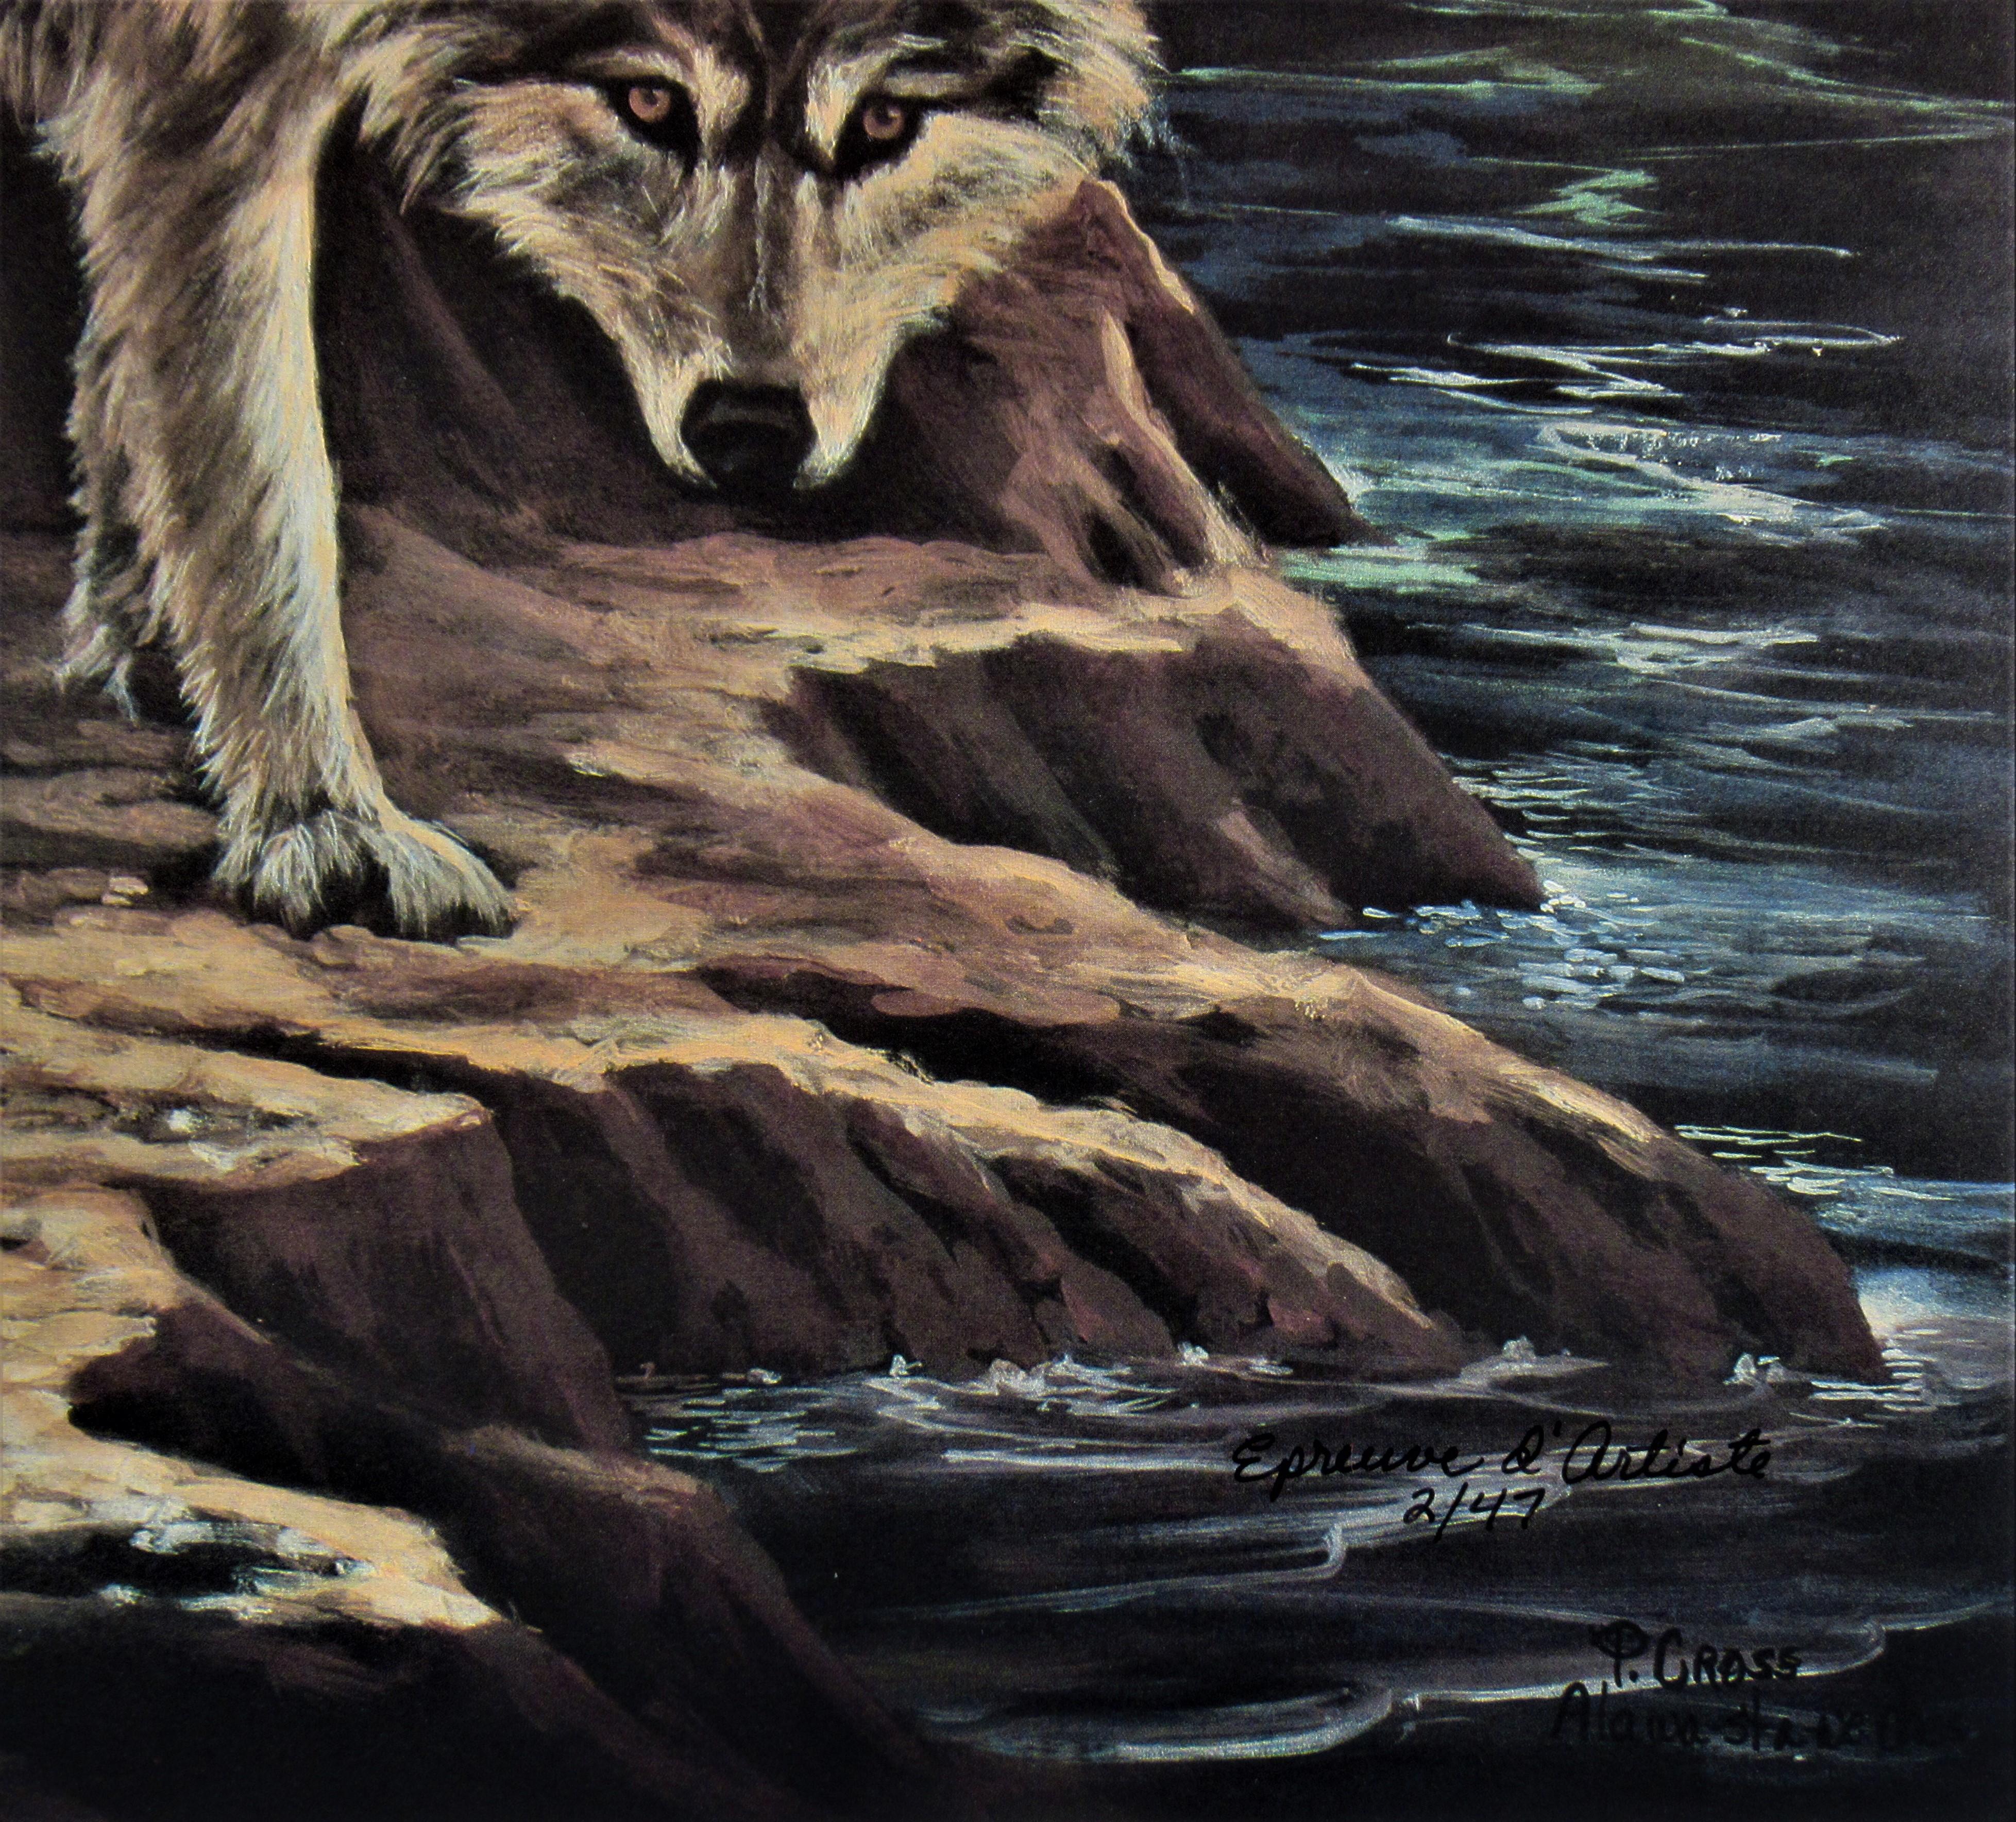  Biagoth Eecuebeh Hehsheesh-Chedah (Red Ridinghood and her Wolves) - Black Figurative Print by Penni Anne Cross